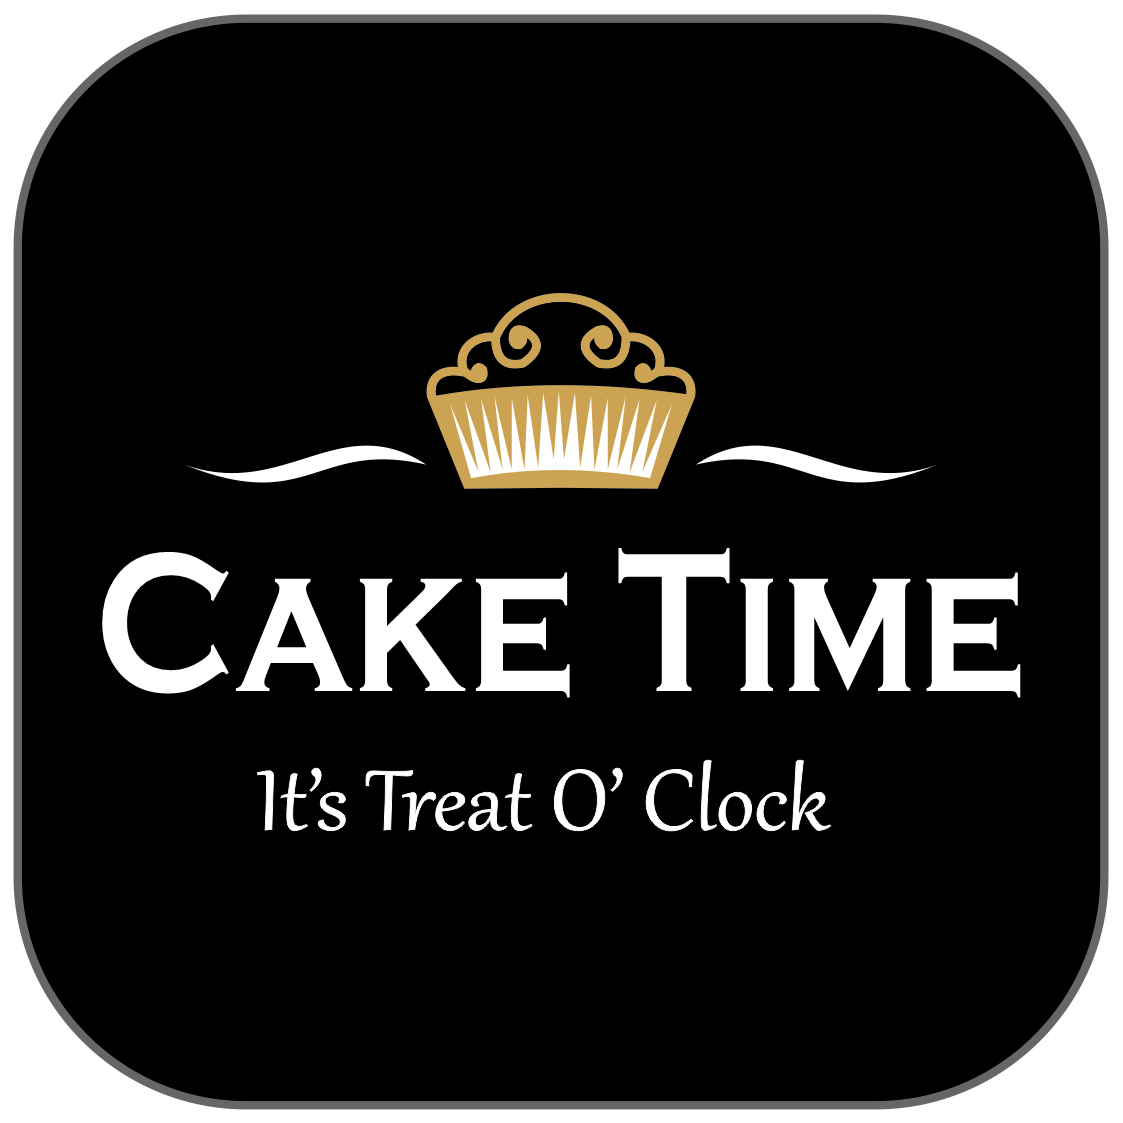 CAKE TIME CAKES